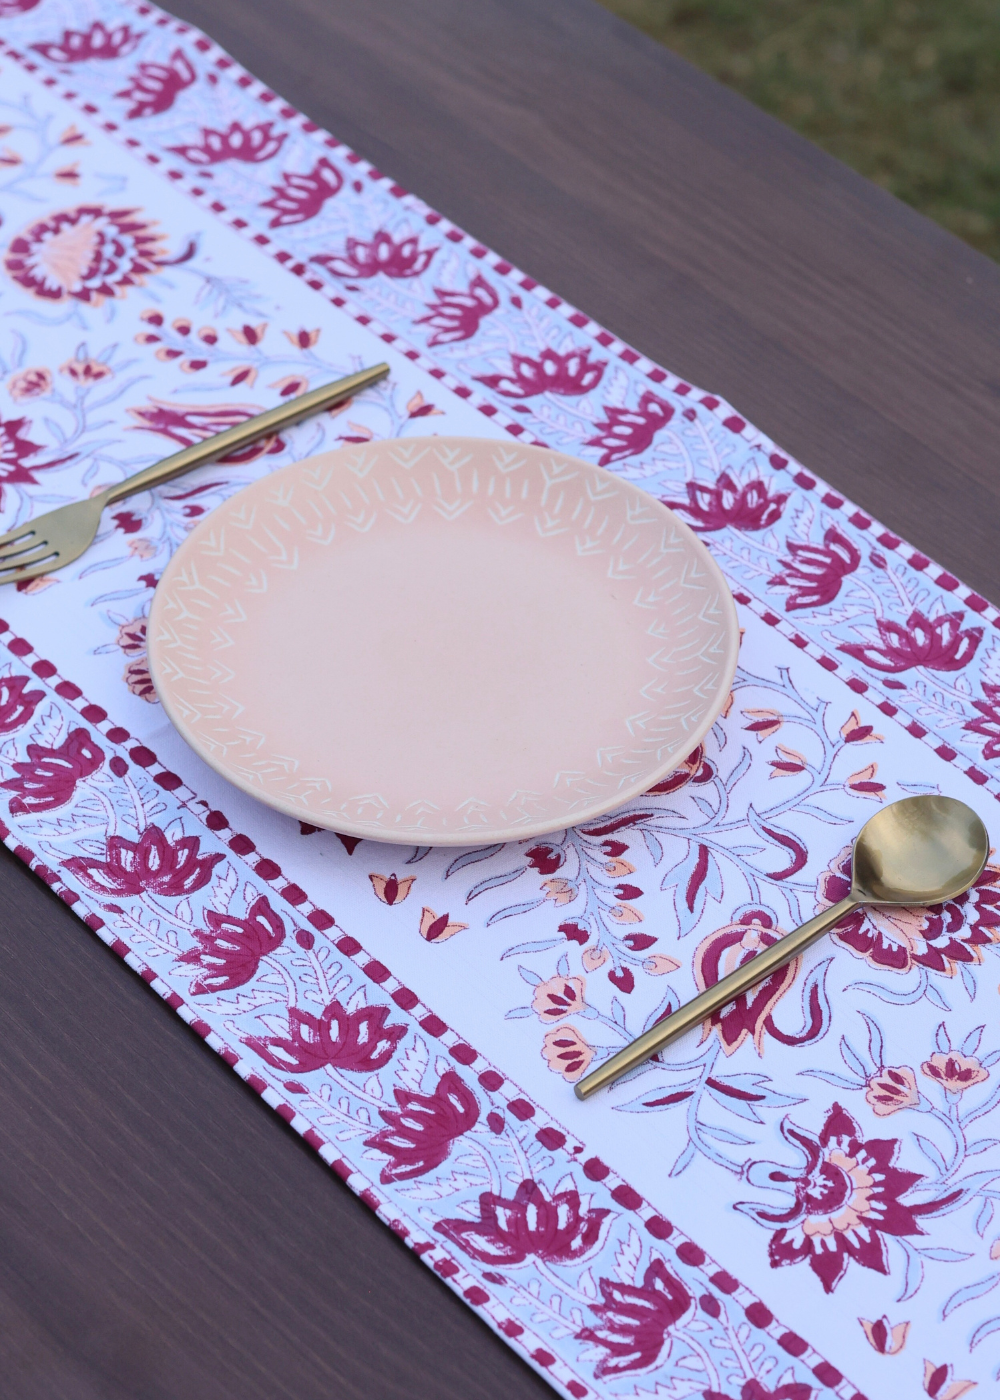 Floral patterned block printed table cloth